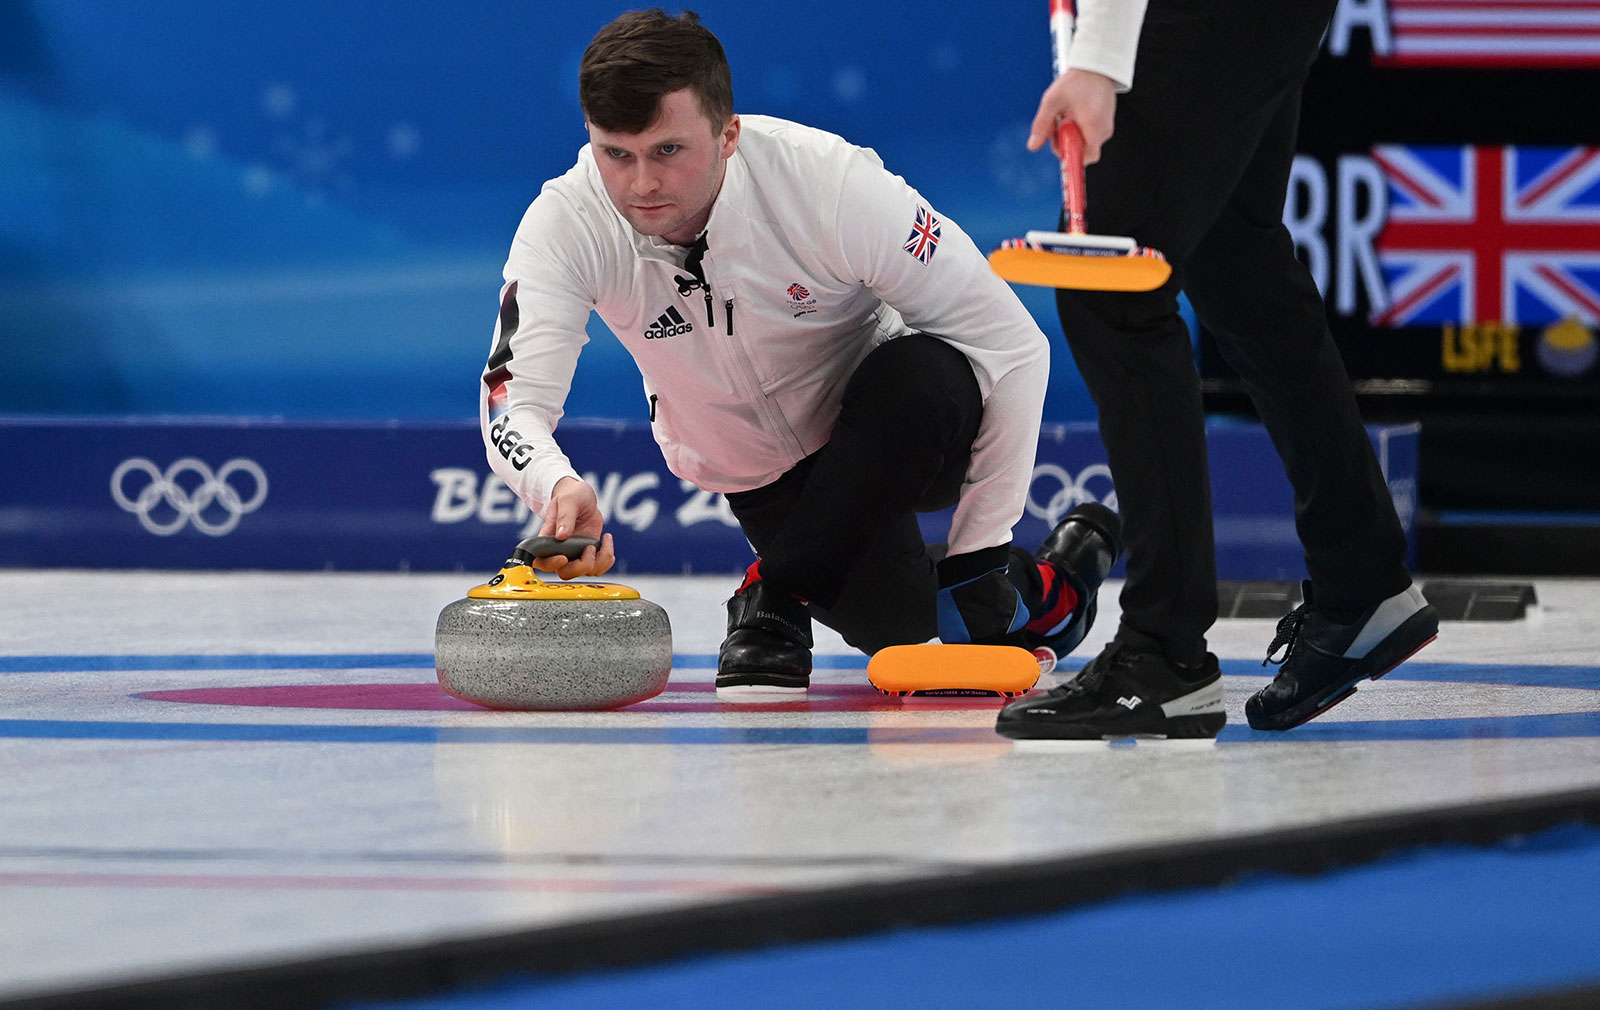 Great Britain's Bruce Mouat delivers a stone during their semifinal match against the United States on February 17.